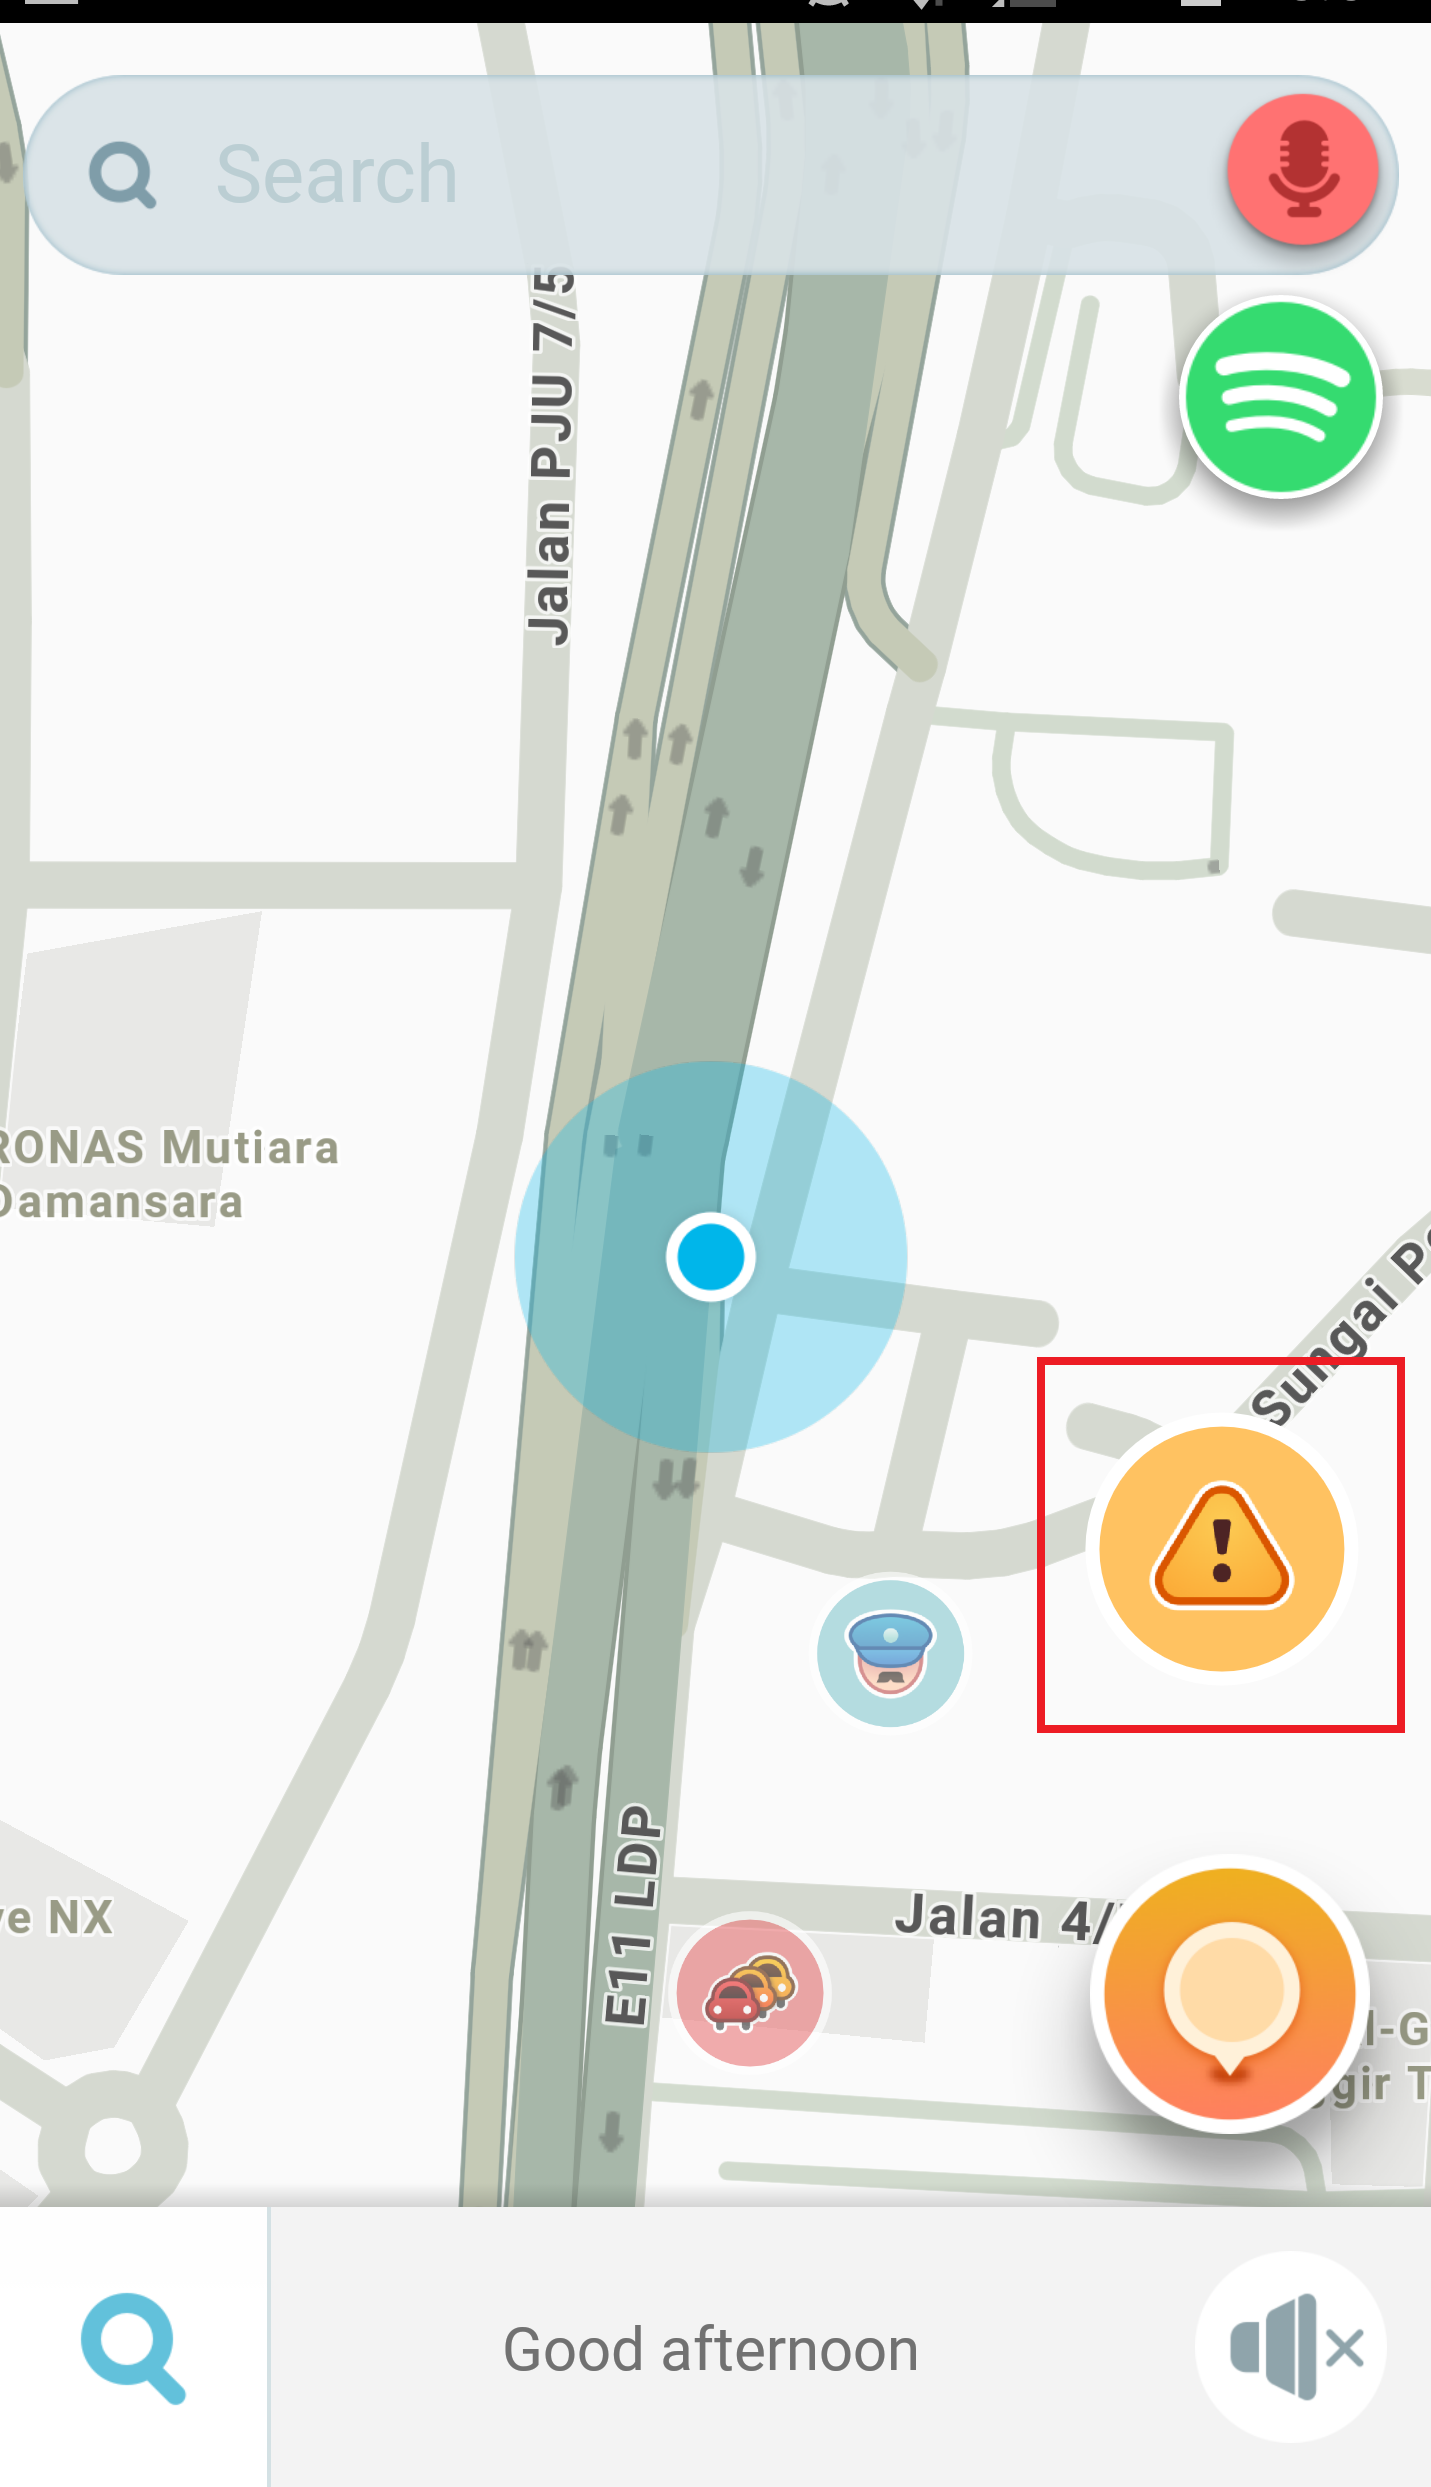 Waze and Selangor Government are working together to patch 